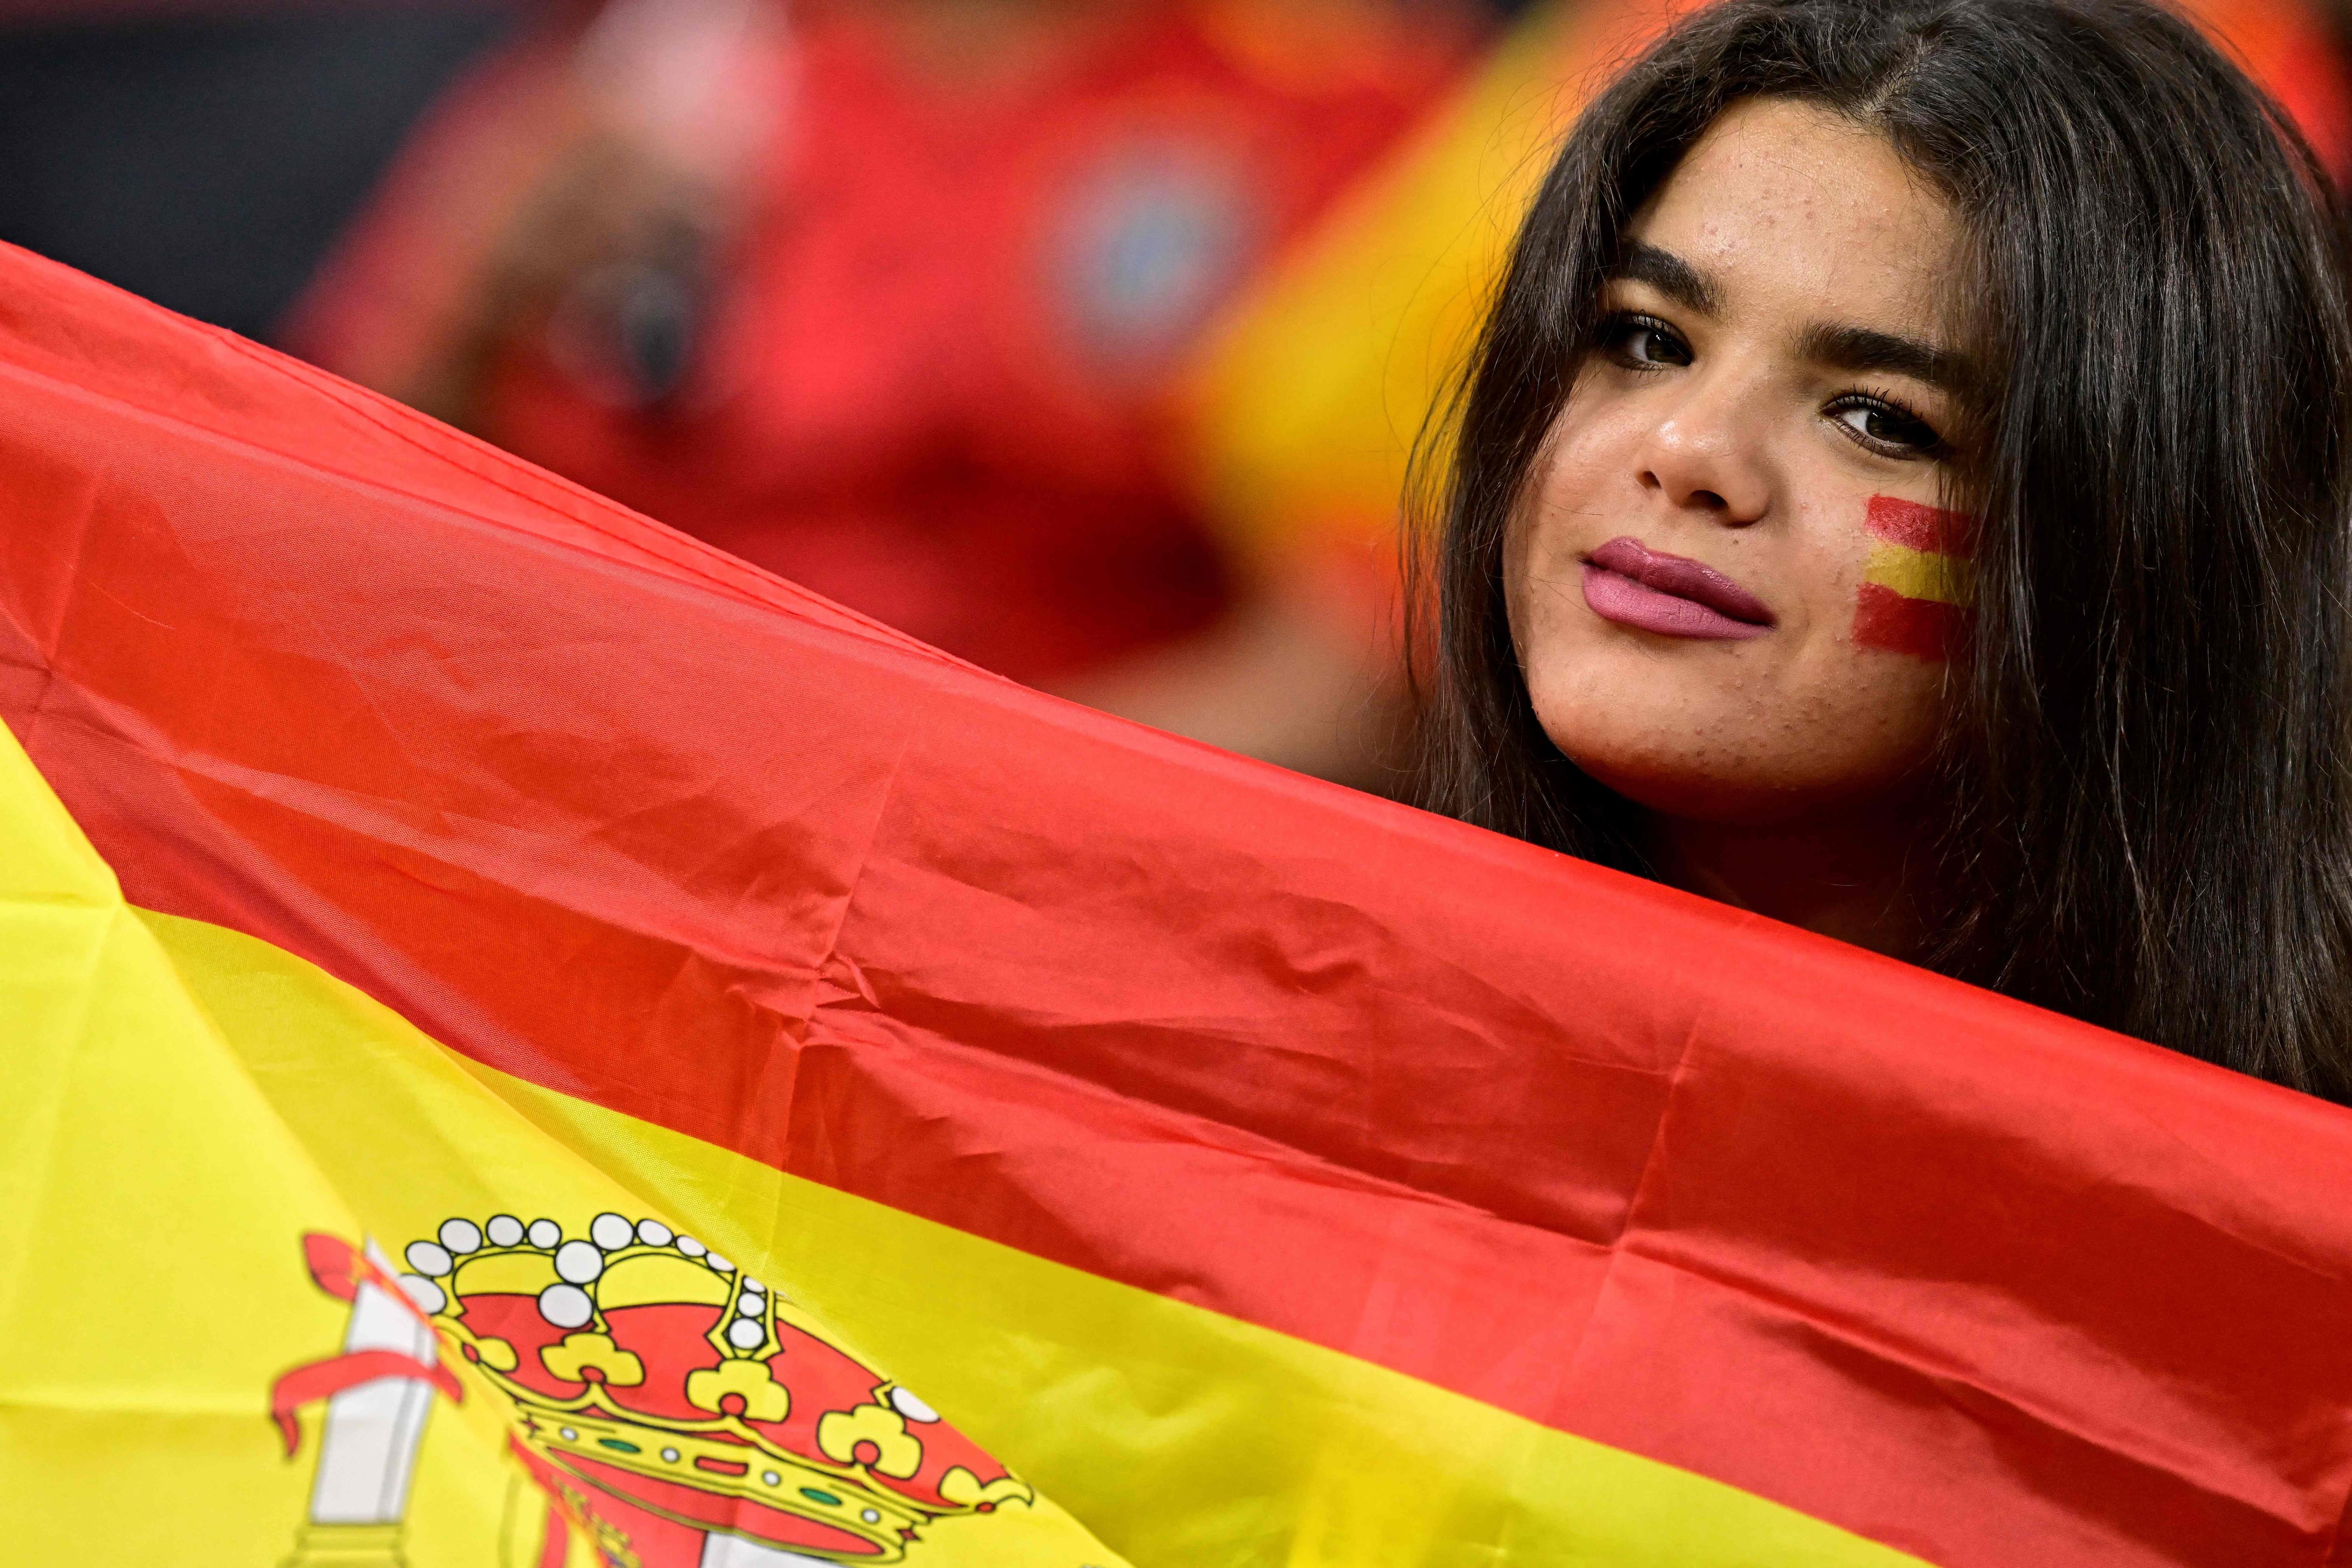 A Spain supporter poses prior to the Qatar 2022 World Cup Group E football match between Spain and Germany at the Al-Bayt Stadium in Al Khor, north of Doha on November 27, 2022. (Photo by JAVIER SORIANO / AFP)